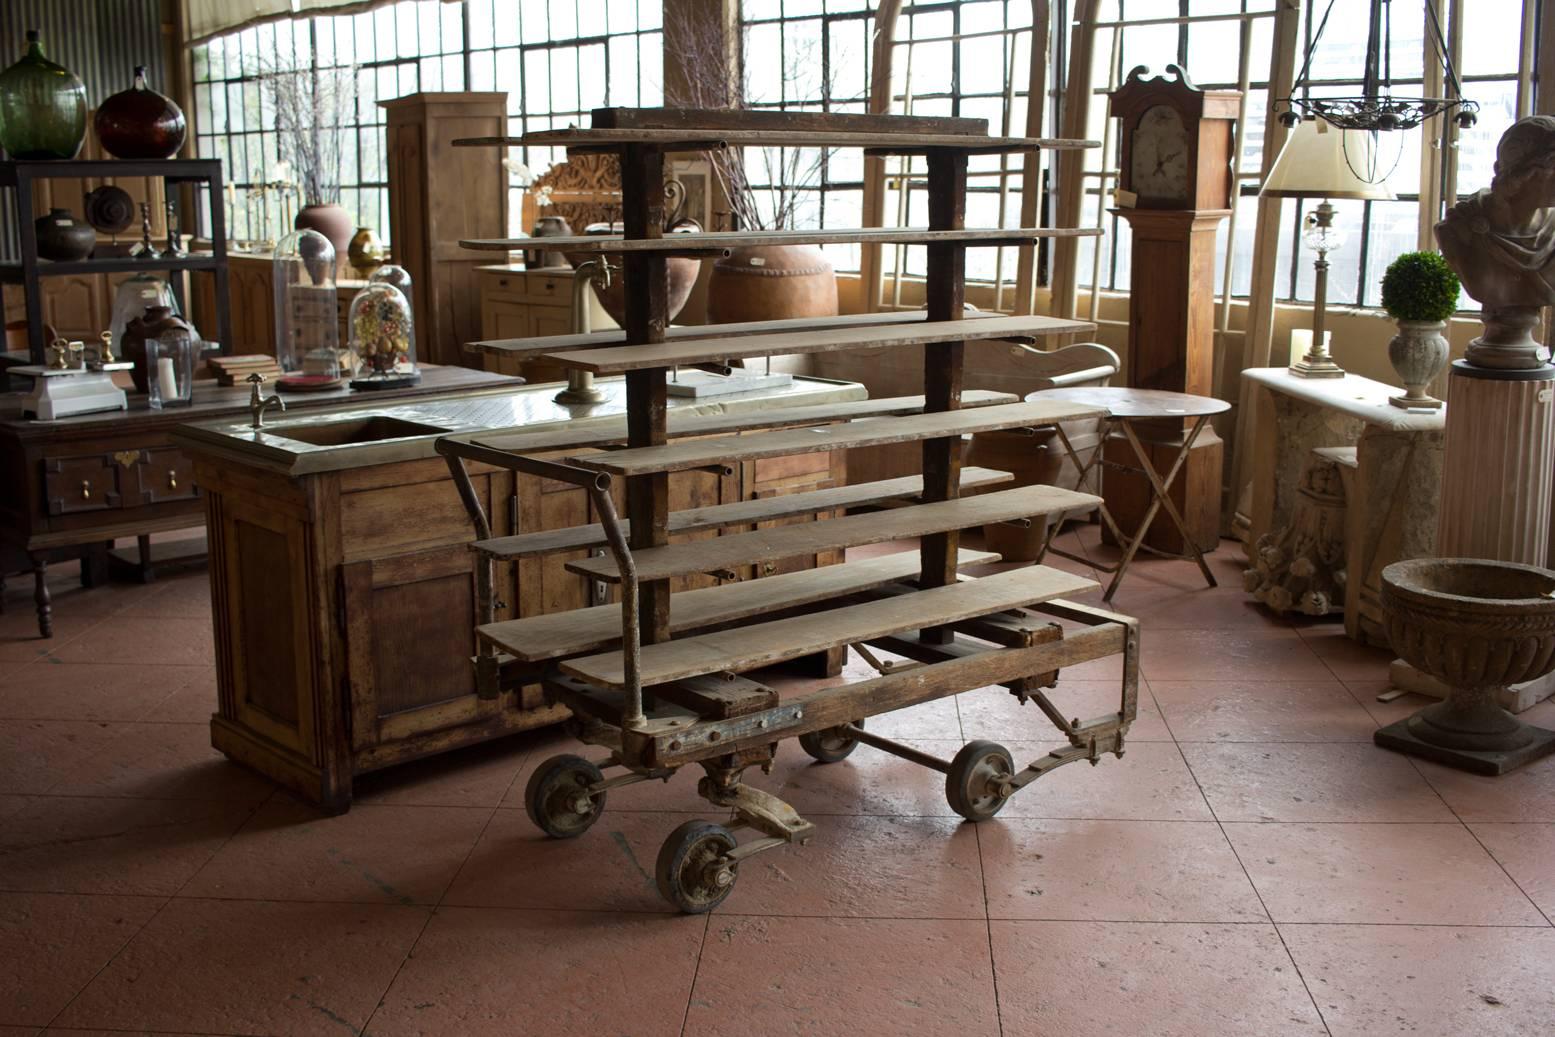 Substantial and rare antique factory cart with 12 shelves. The cart came from the famous Buffalo Pottery Company in New York. They have shock absorbers on them due to the nature of carting around the porcelain chinaware. 

We have two available!